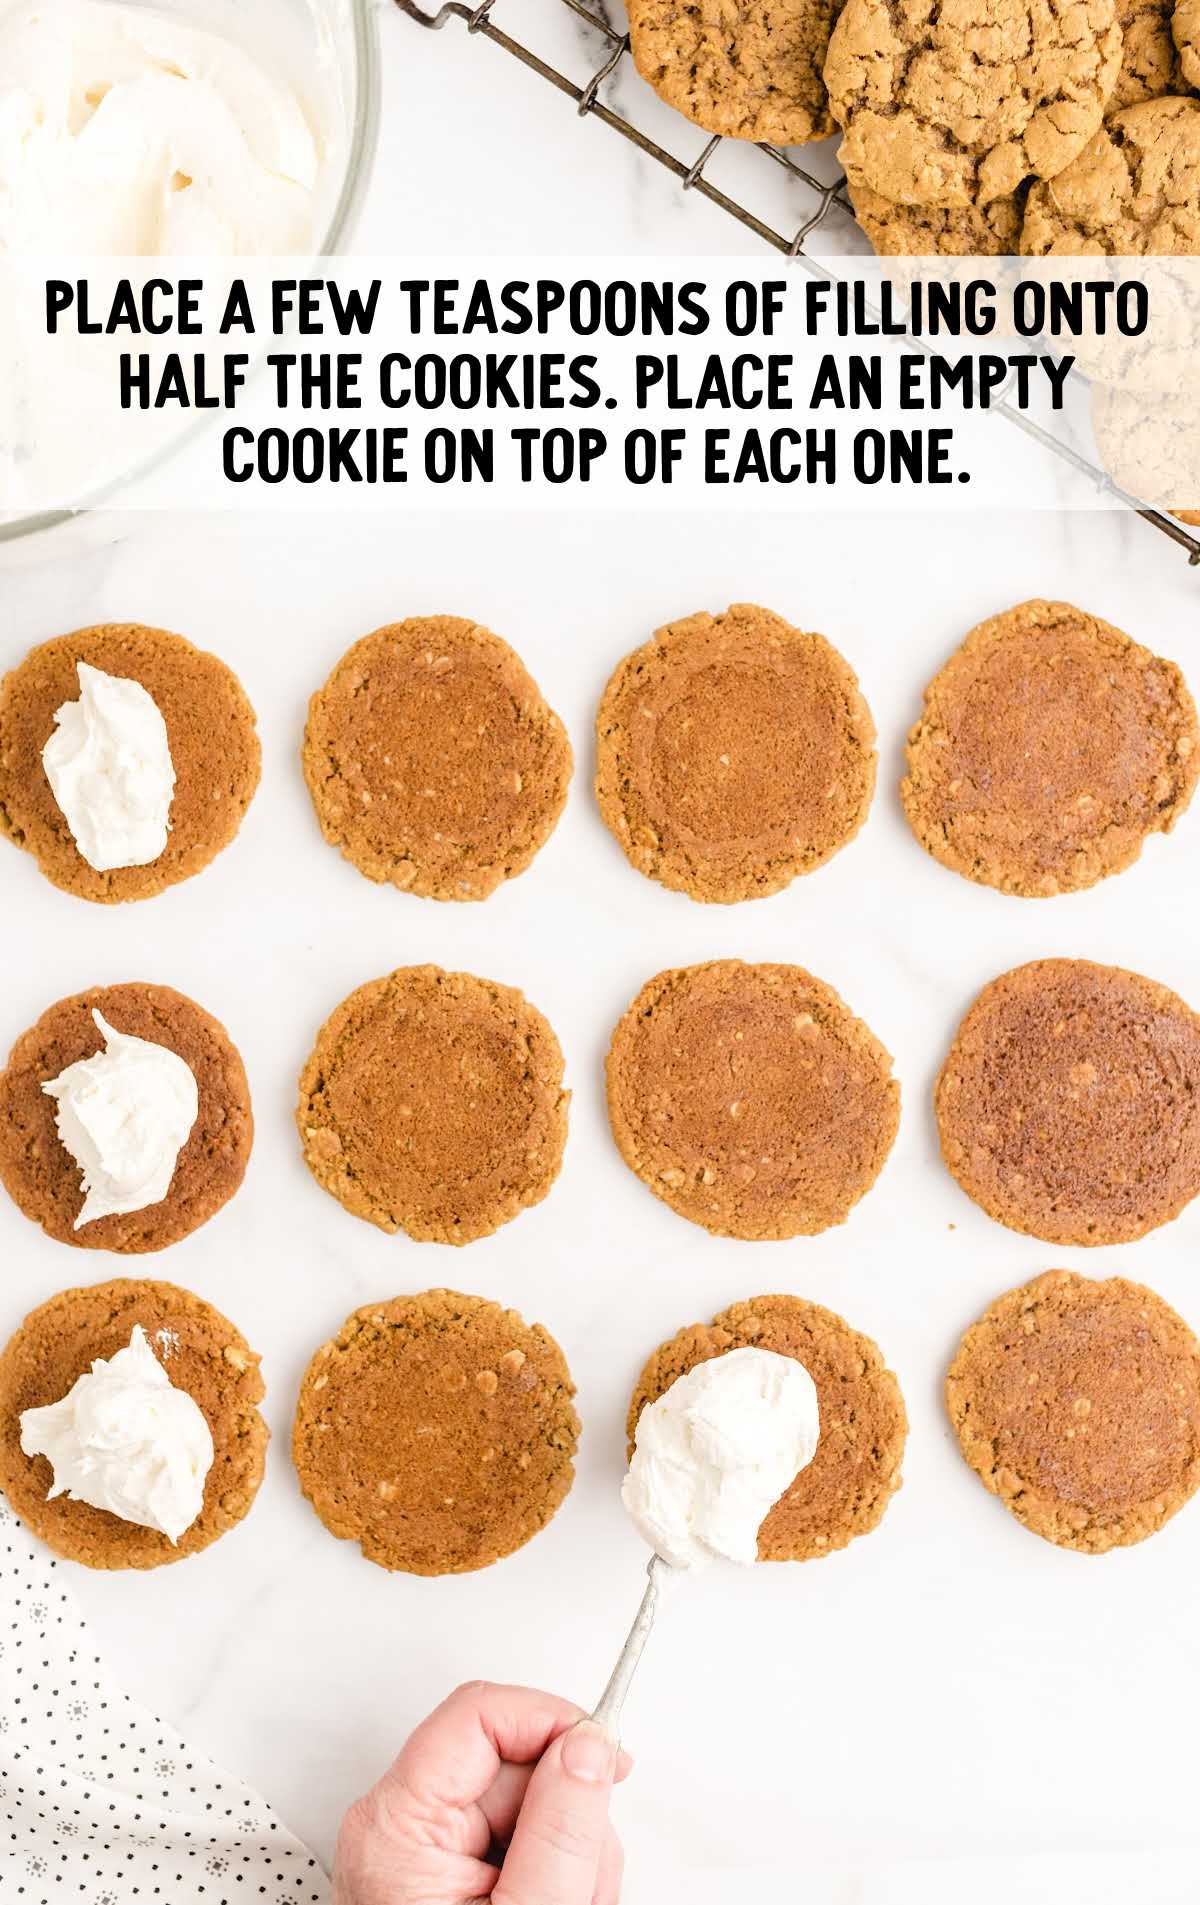 teaspoons of fillings placed into half of the cookies